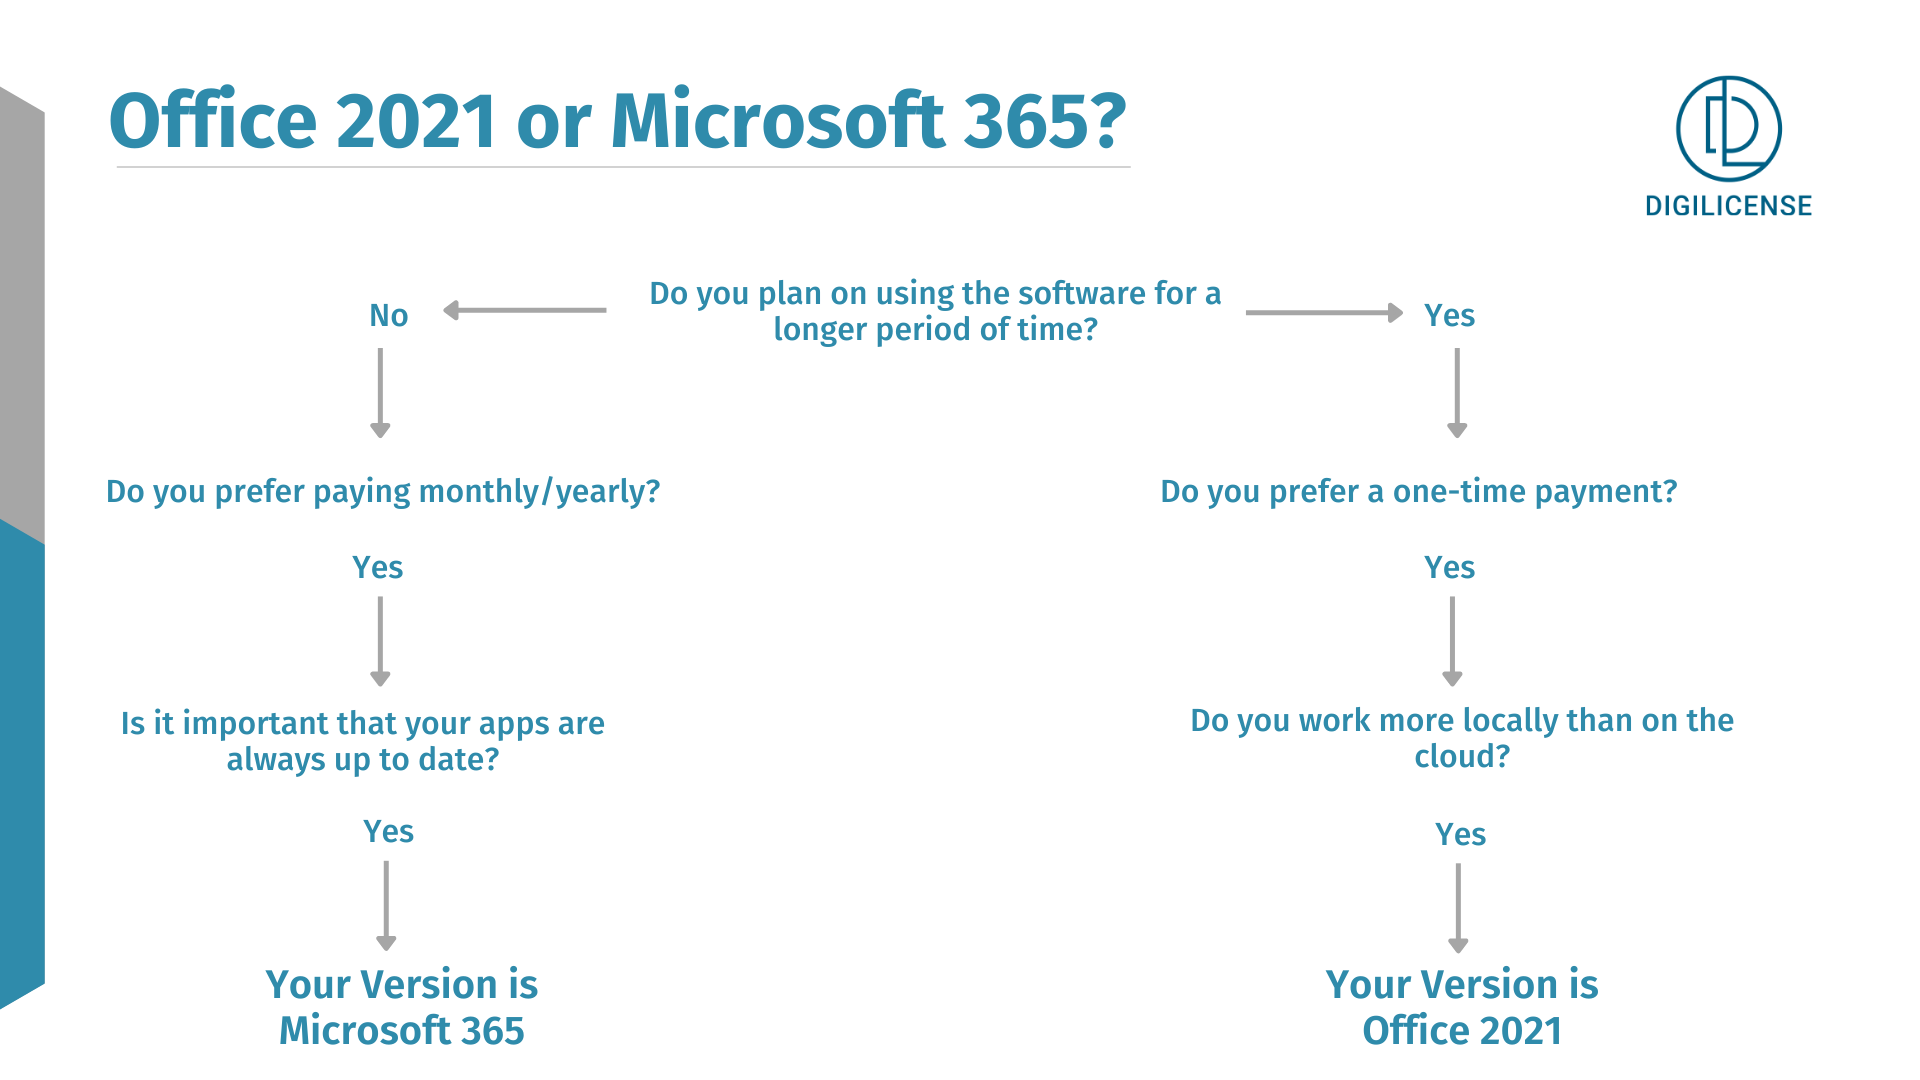 Office 2021 vs. Microsoft 365: How to choose